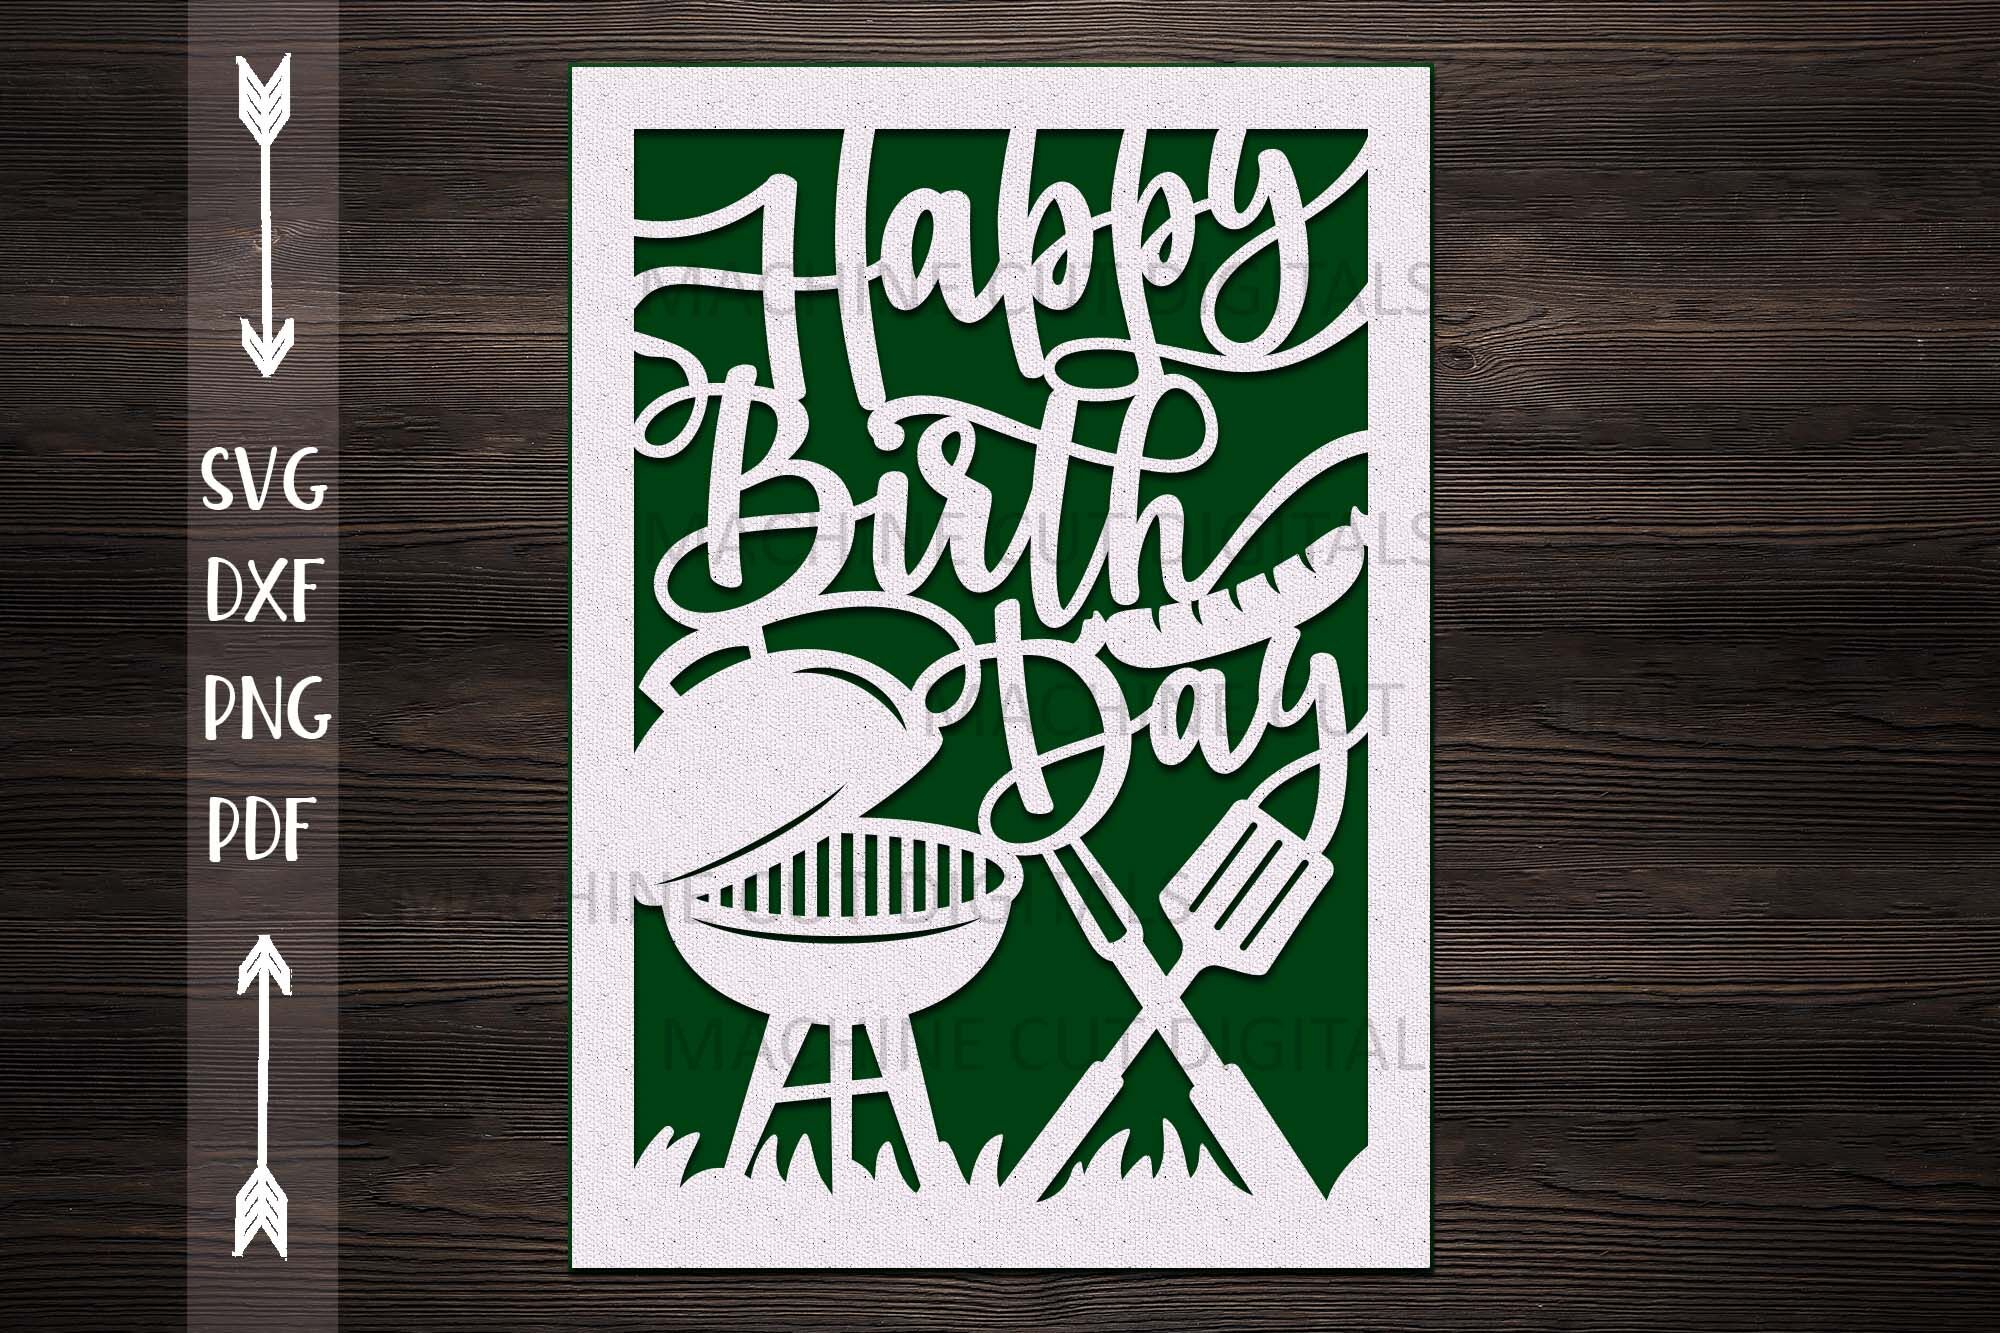 Cricut Birthday Cards Svg Free - 756+ SVG PNG EPS DXF in Zip File